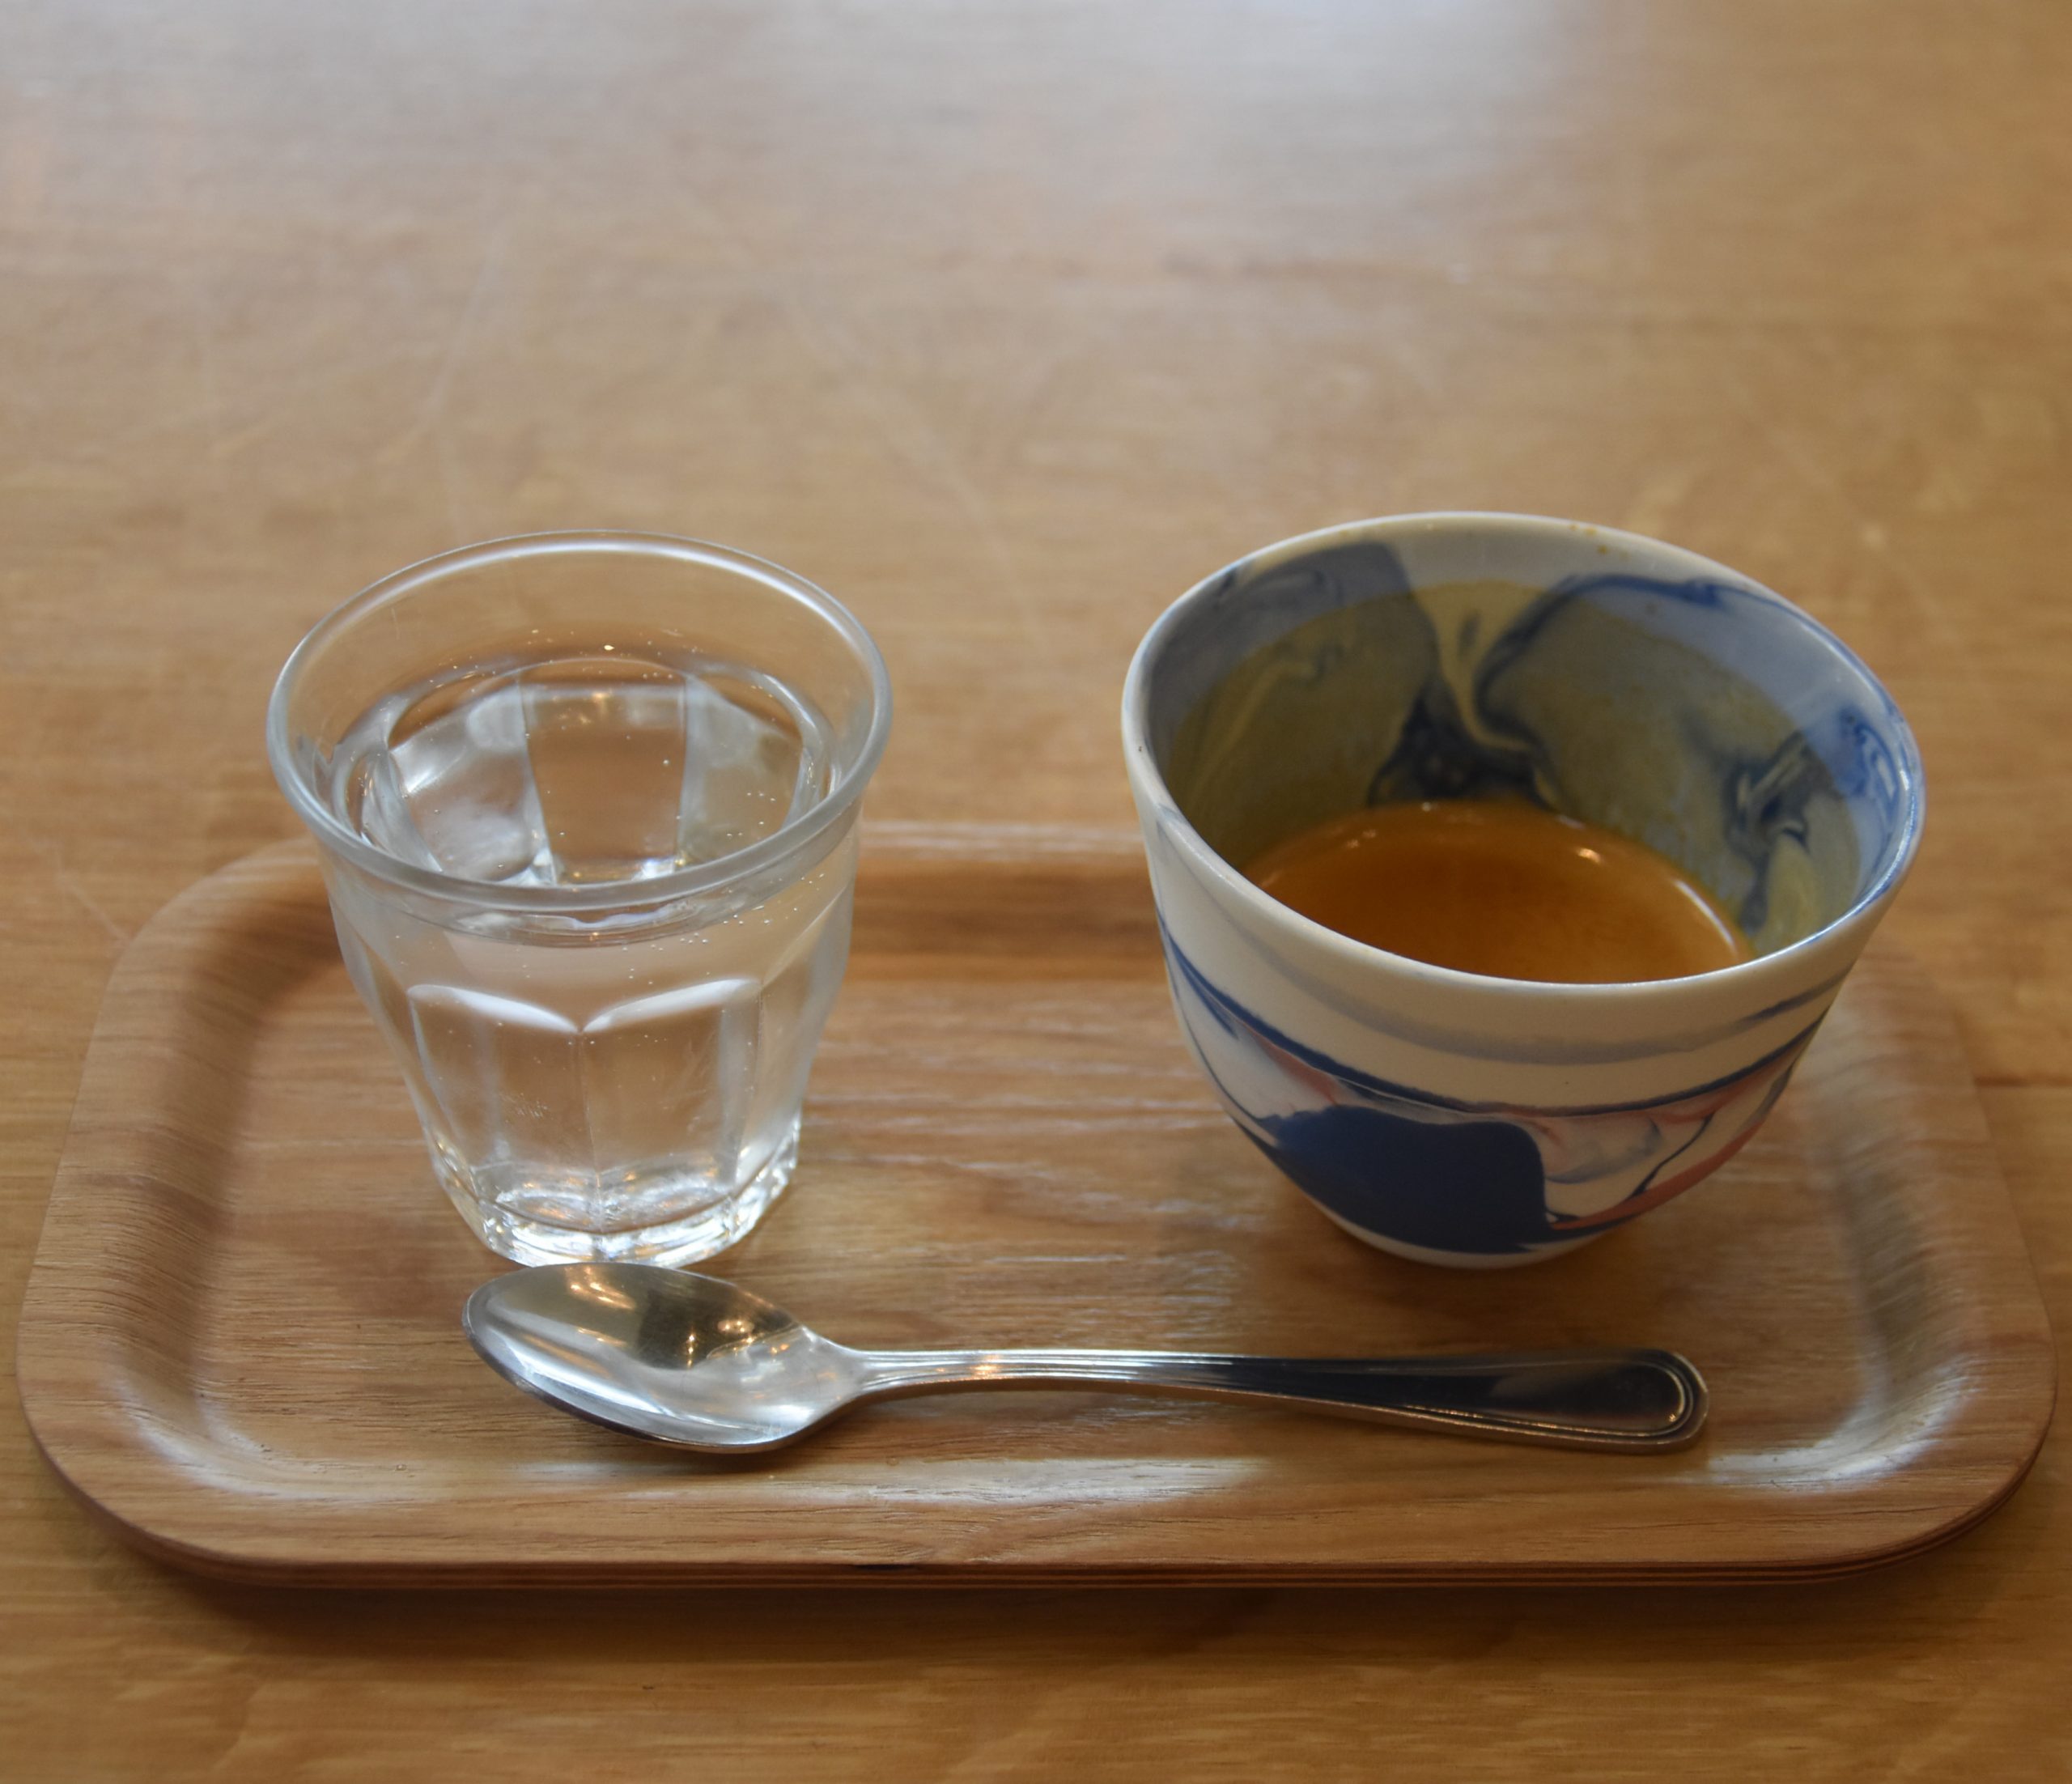 My espresso, the Baroida Estate, a naturally-processed coffee from Papua New Guinea, roasted and served by CoRo in its Coffee Room in Berkeley. The handleless ceramic cup is bespoke to CoRo, while the coffee is presented on a small, wooden tray with a glass of water on the side.